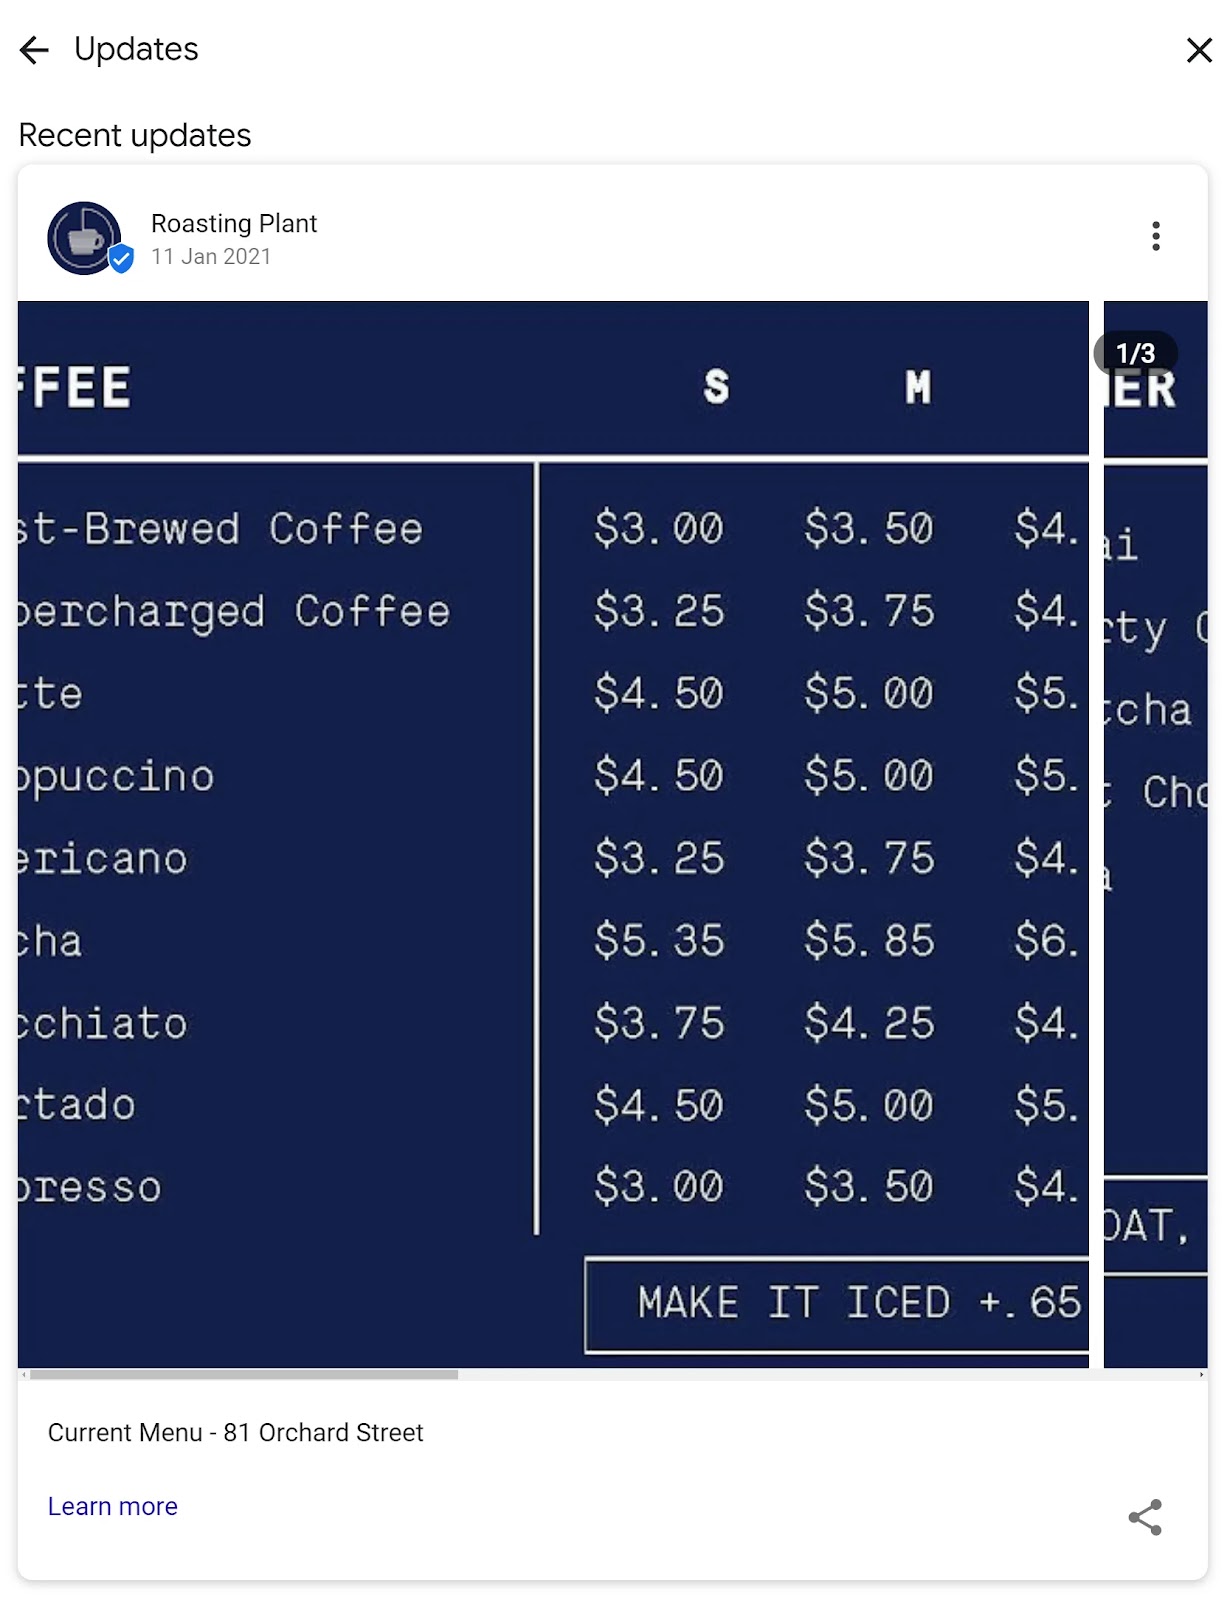 Roasting Plant's GBP update sharing the changes to its pricing